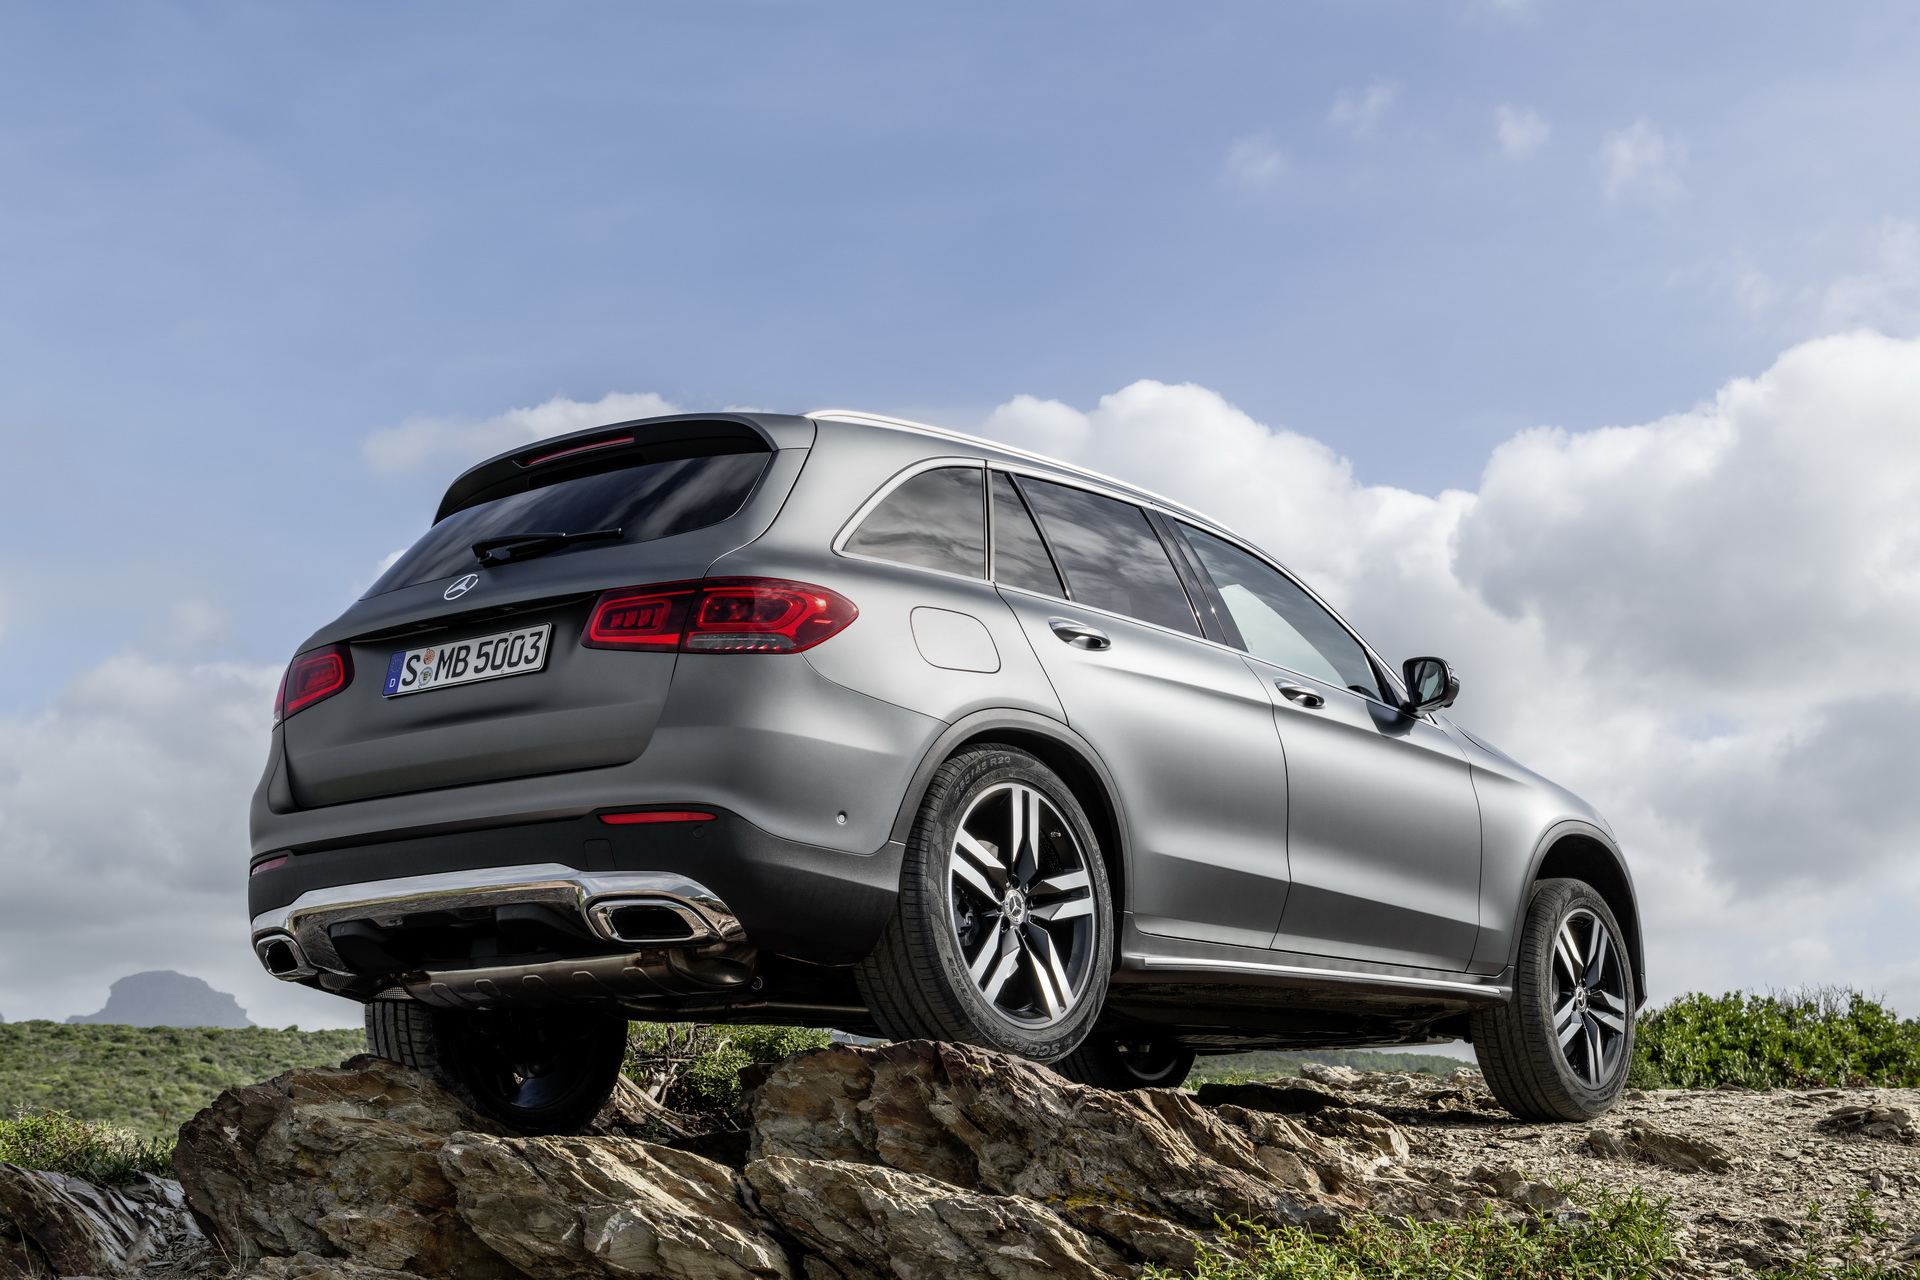 2020 Mercedes Benz Glc Goes On Sale In The Uk Priced From 39 420 Carscoops